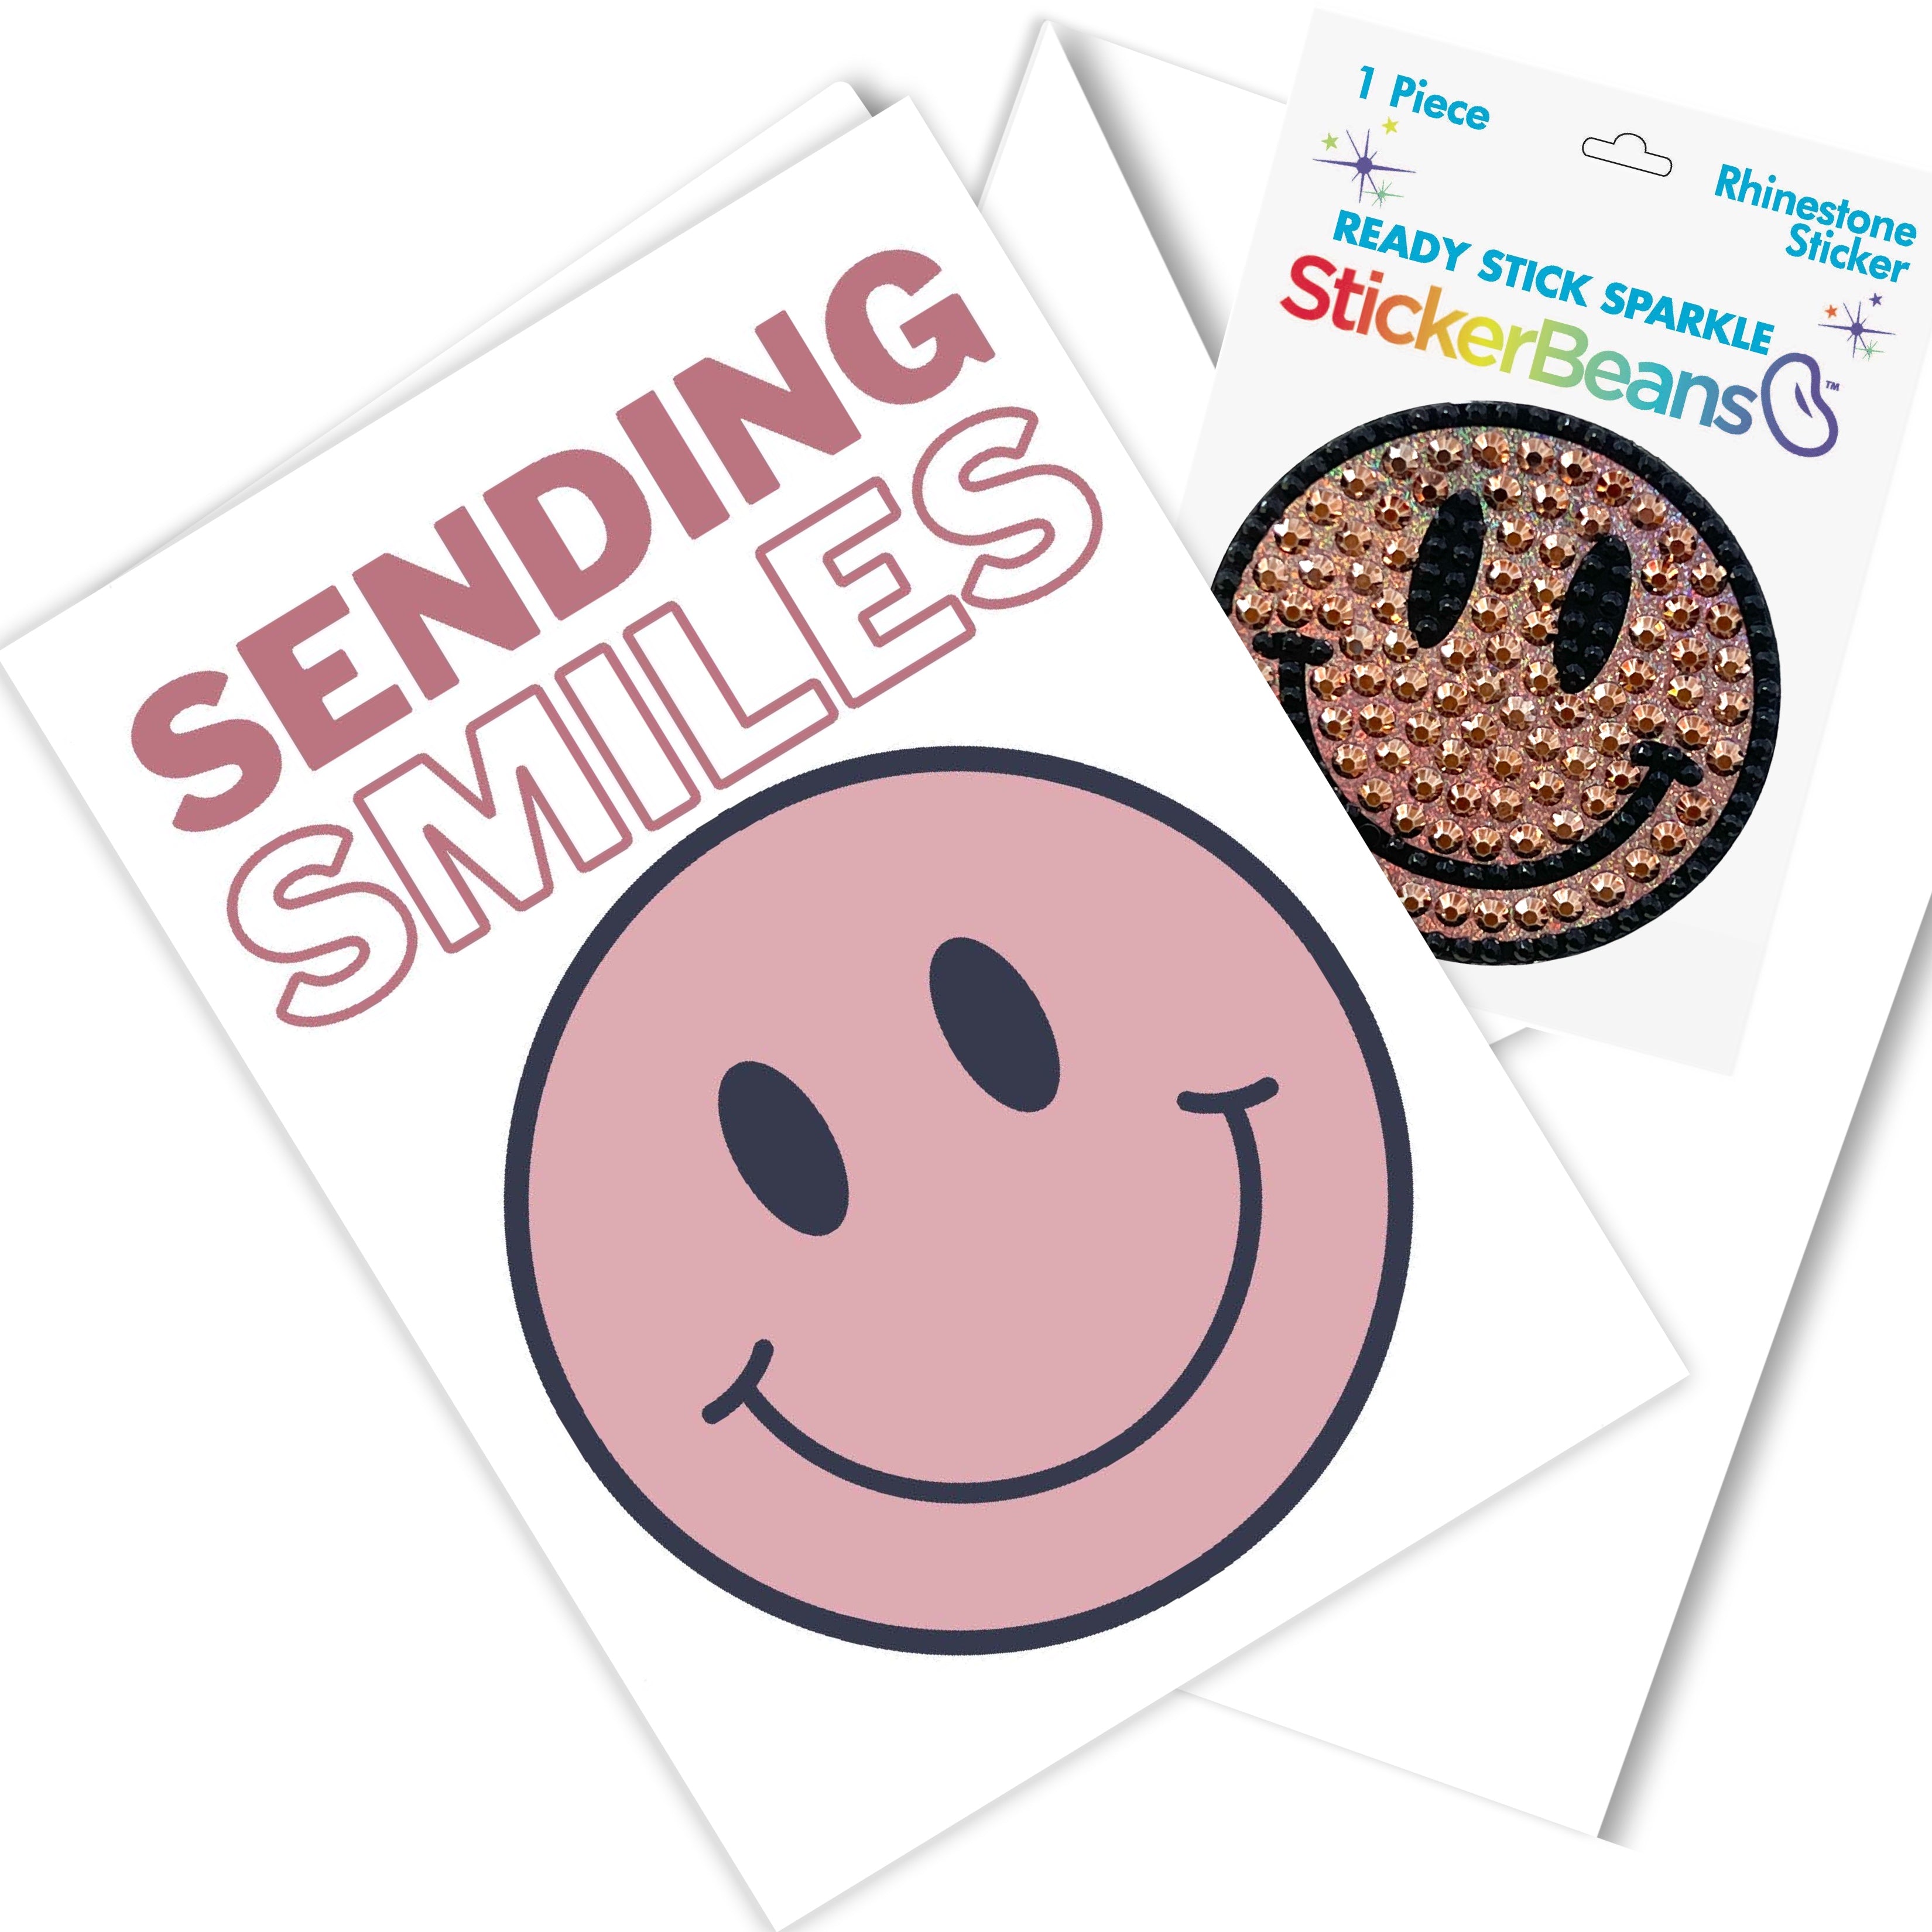 StickerBeans Greeting Card With Coordinating Sticker – Sending Smiles – 5" X 7"